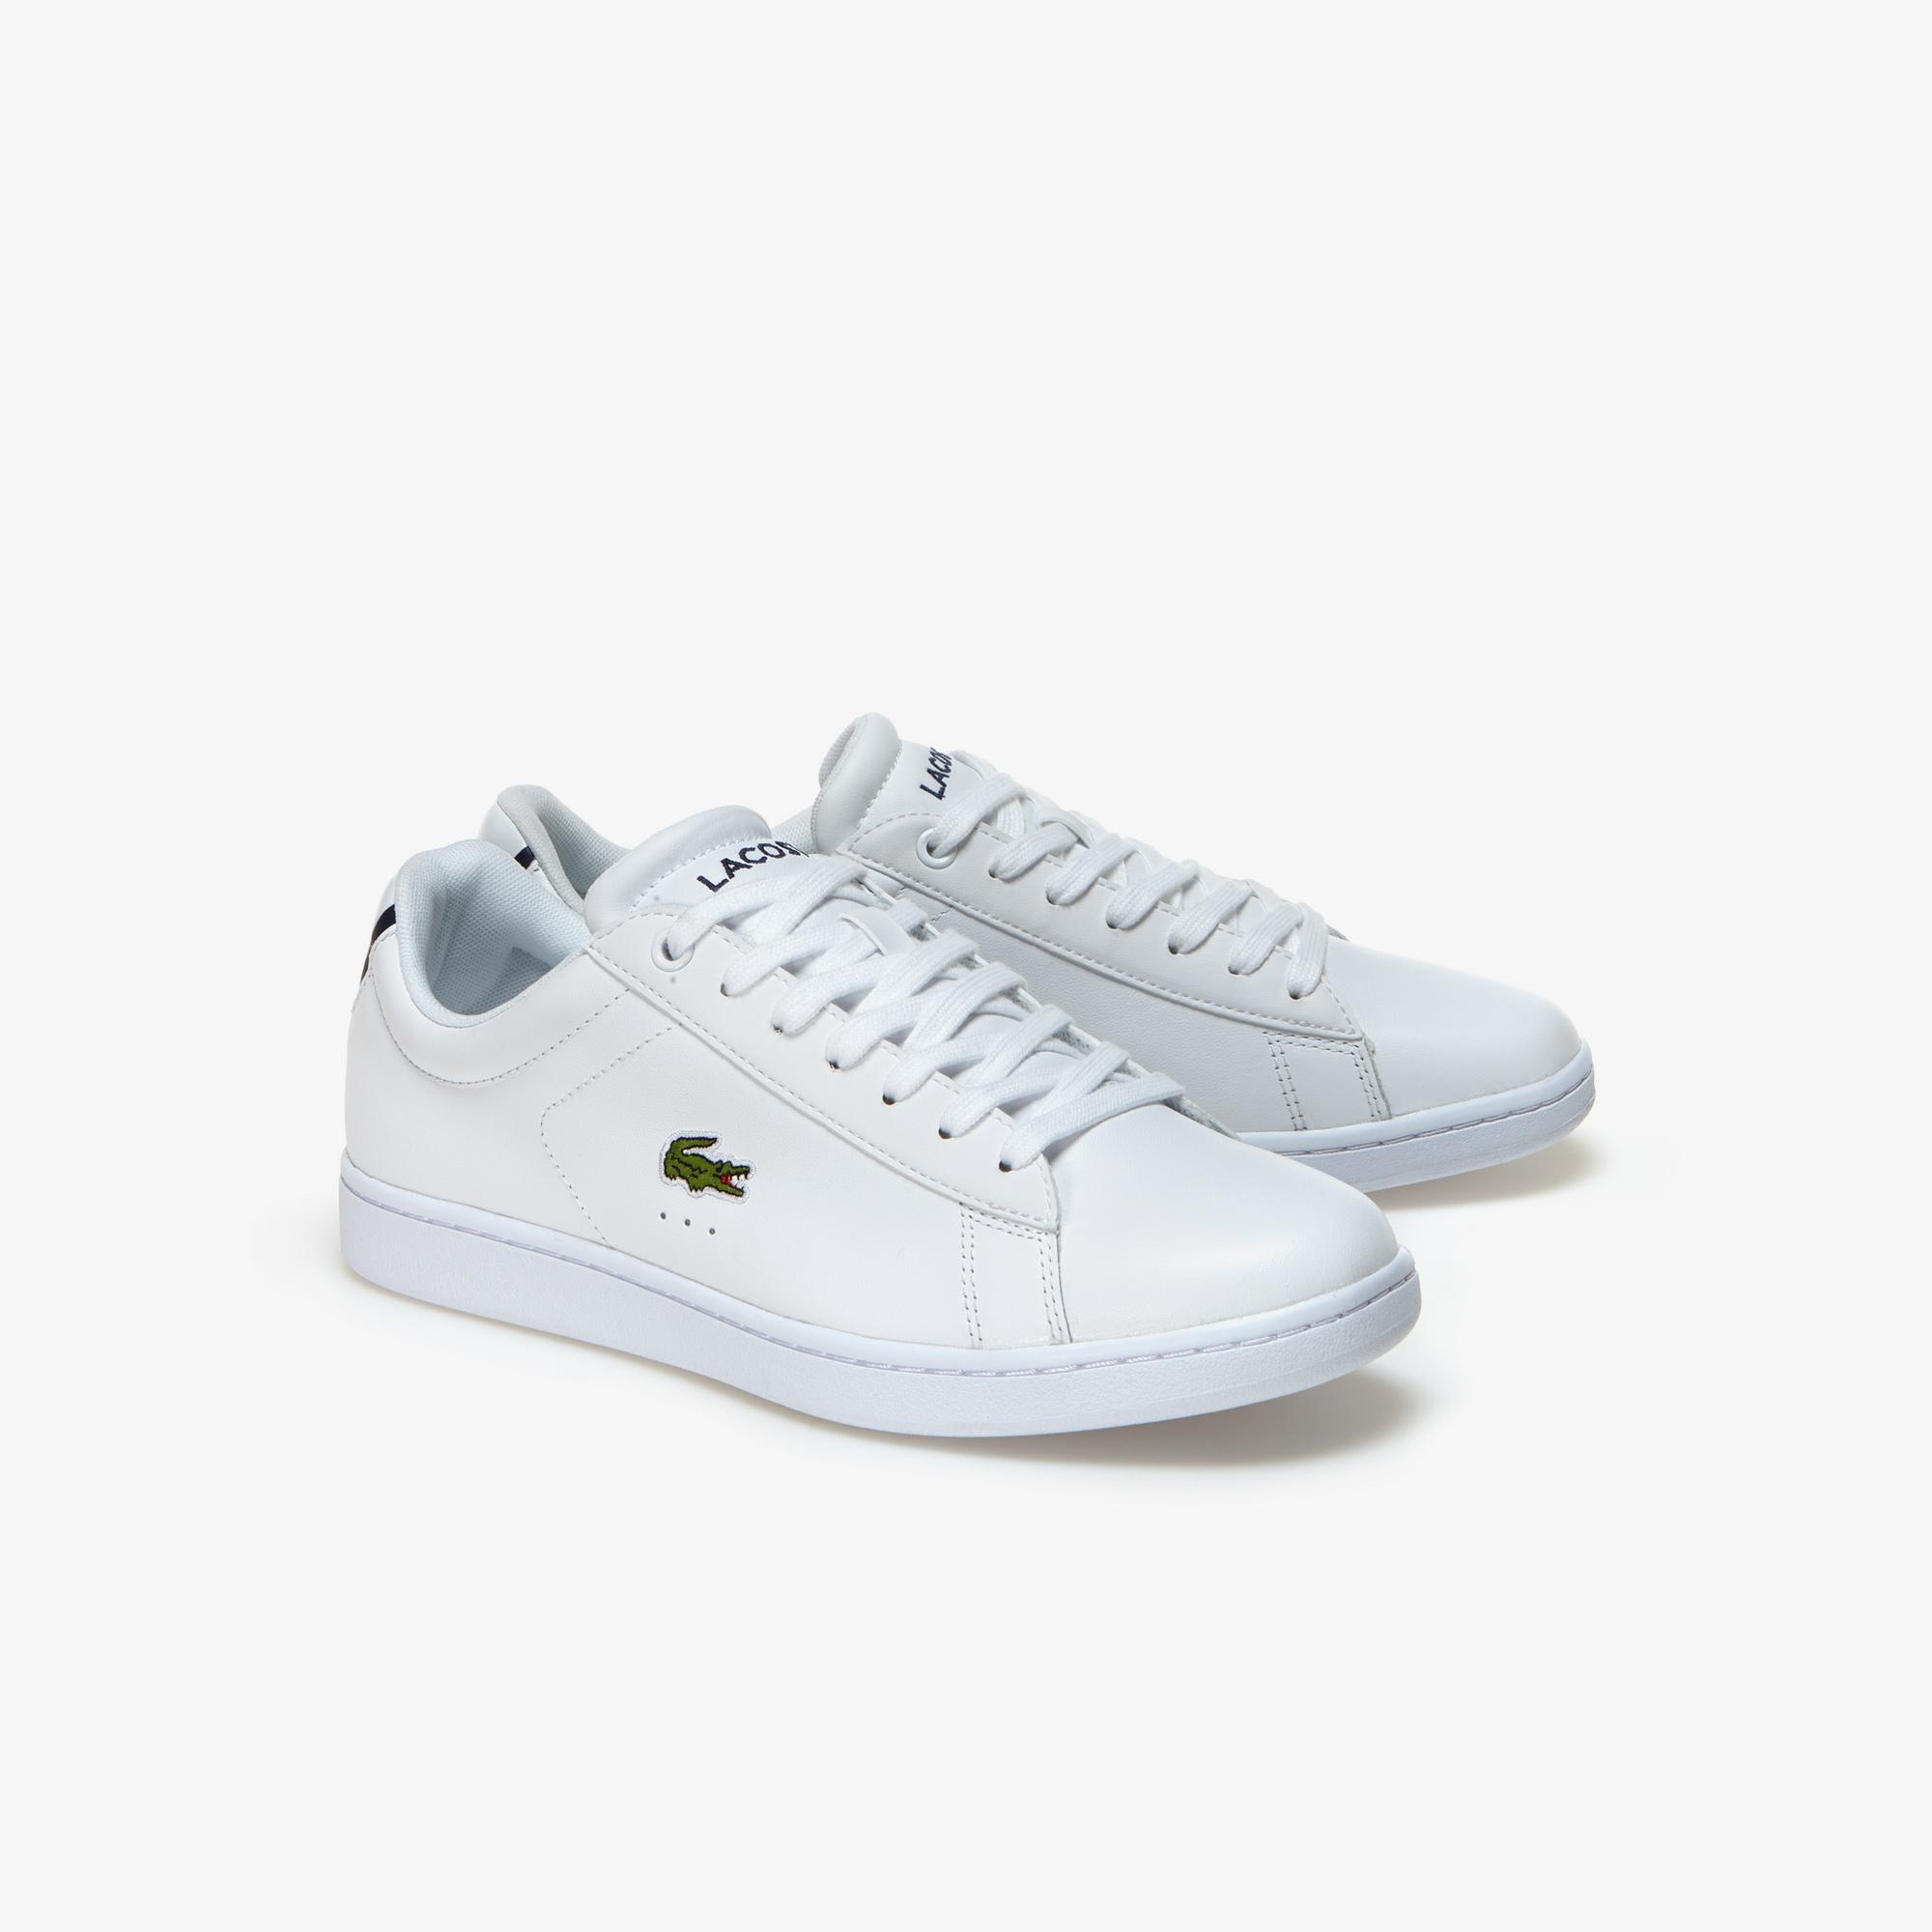 Lacoste Carnaby Evo BL 1 Men's leather sneakers